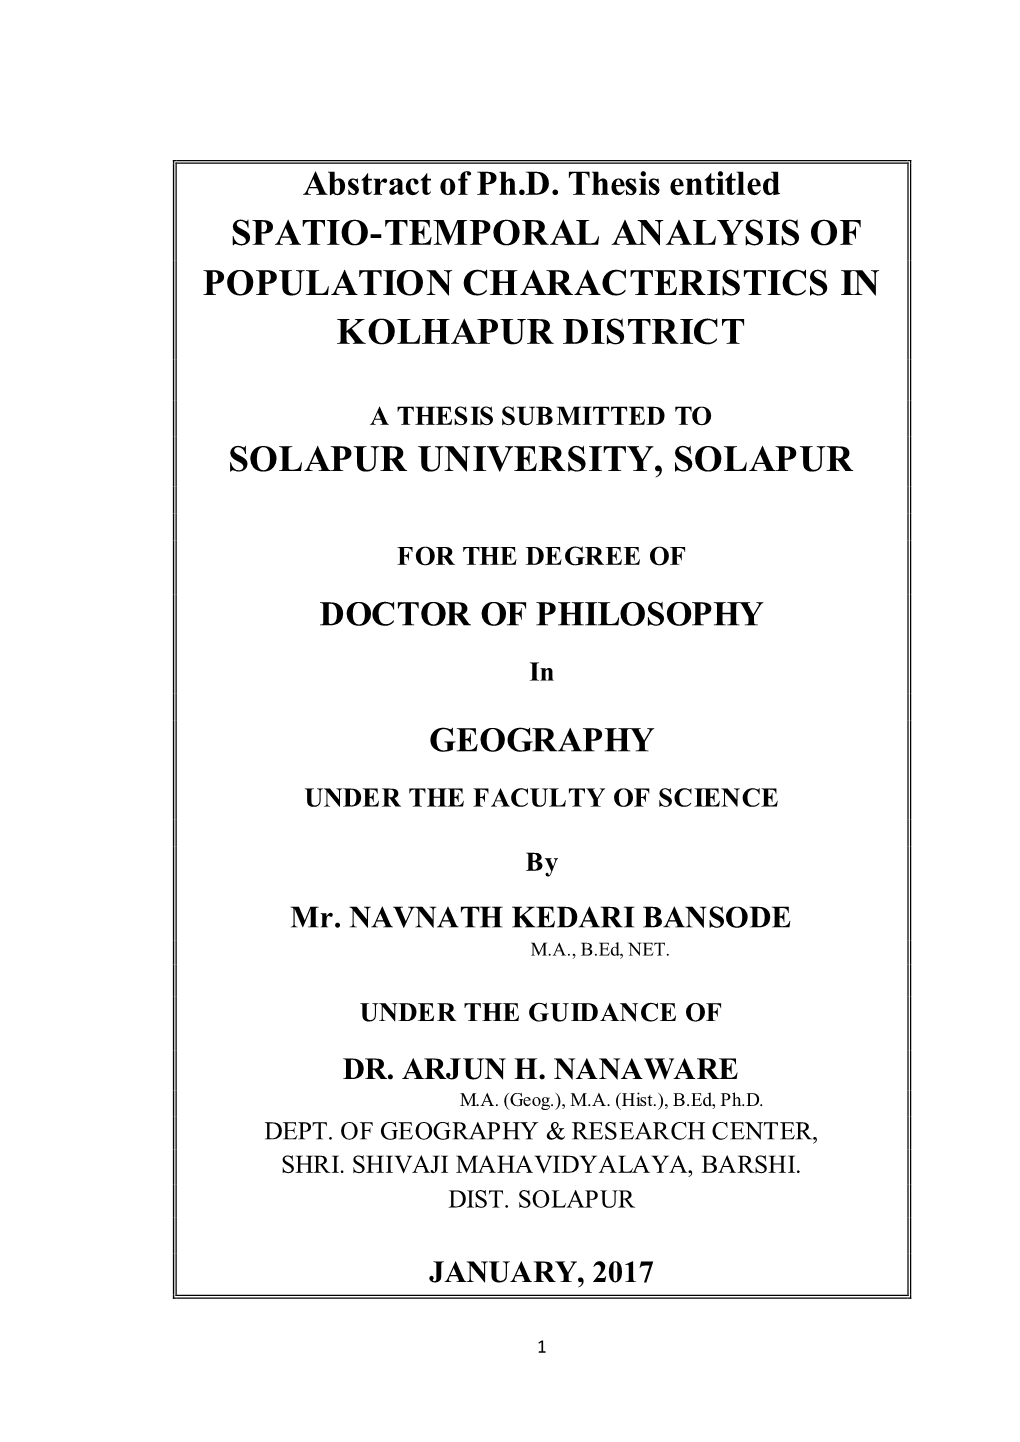 Spatio-Temporal Analysis of Population Characteristics in Kolhapur District